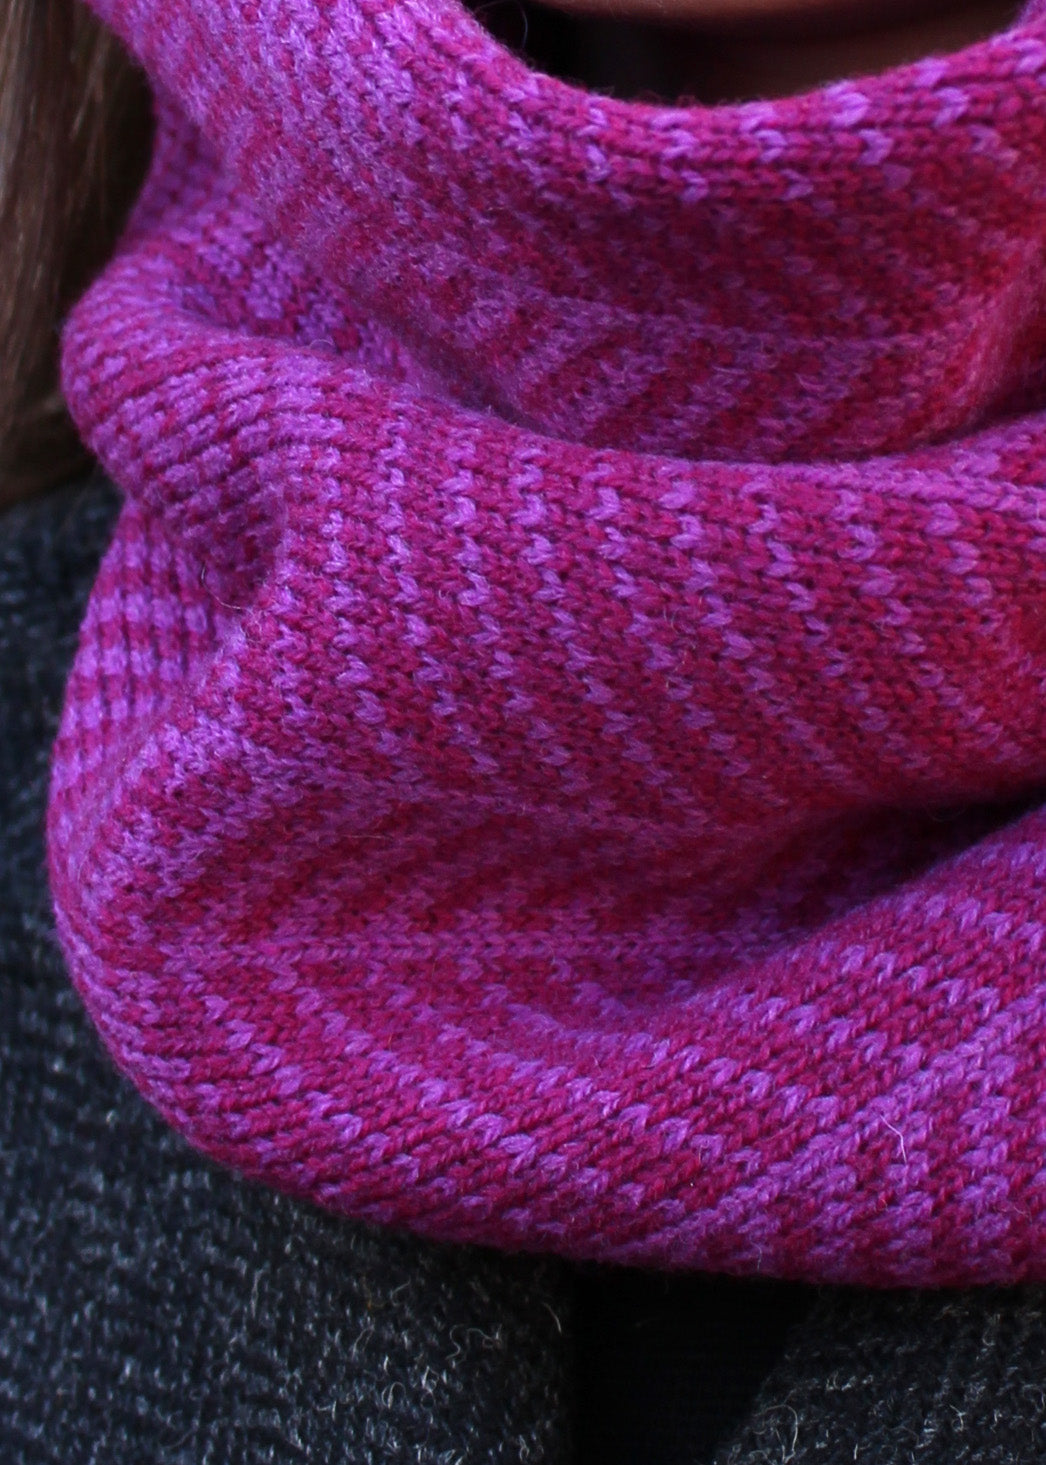 Merino lambswool neck warmer in shades of magenta and cerise with a design inspired by the glass roof of Waverley Railway Station in Edinburgh.